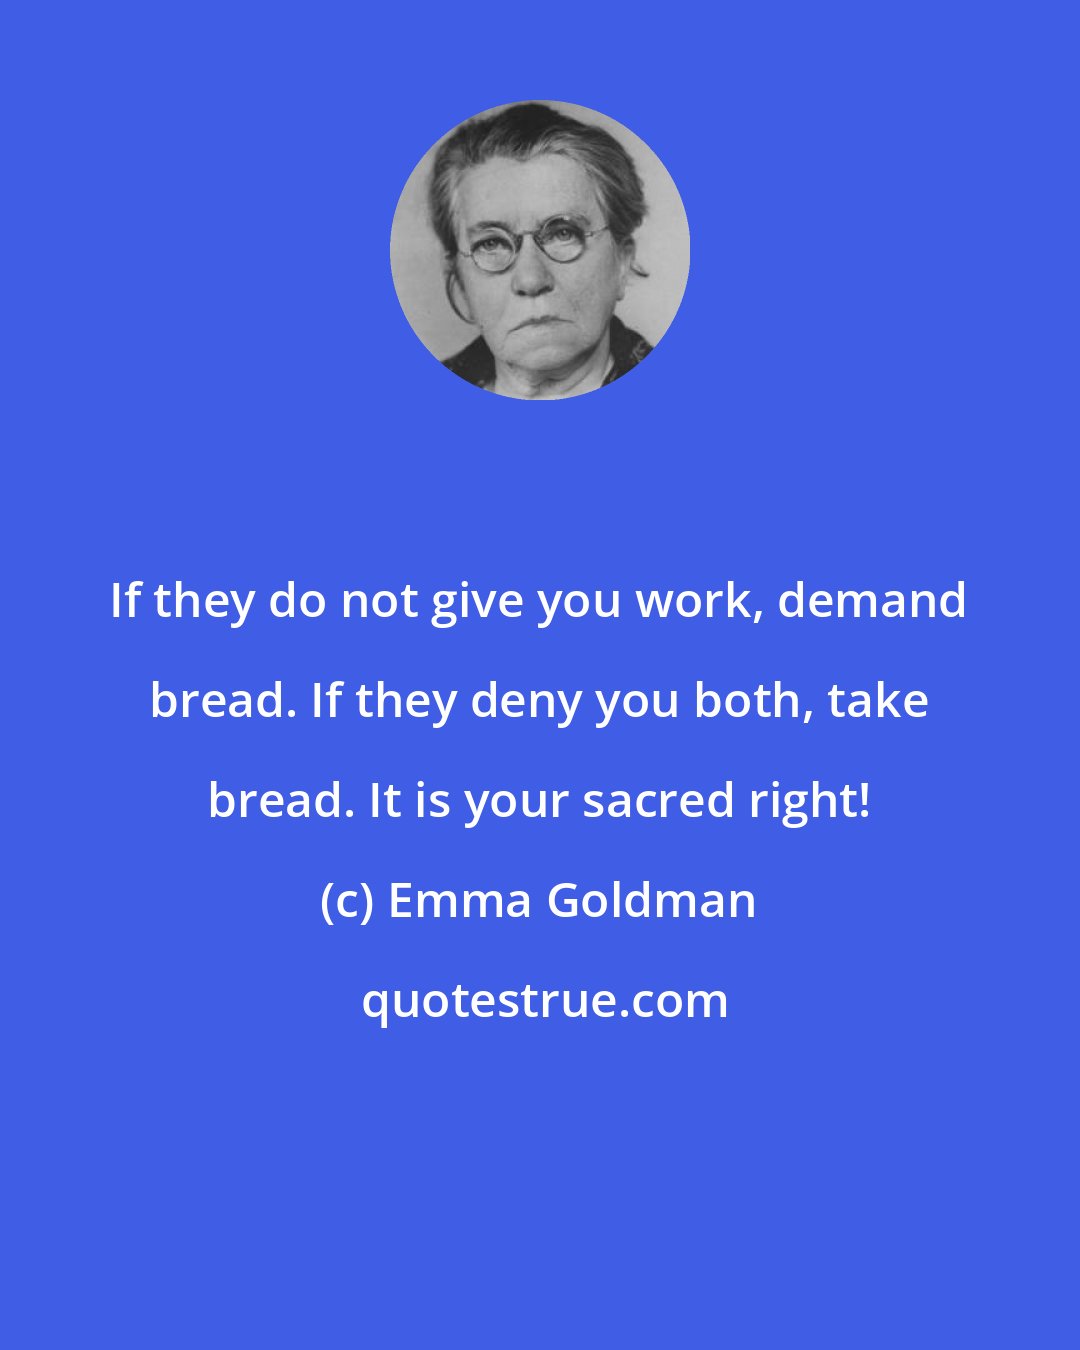 Emma Goldman: If they do not give you work, demand bread. If they deny you both, take bread. It is your sacred right!